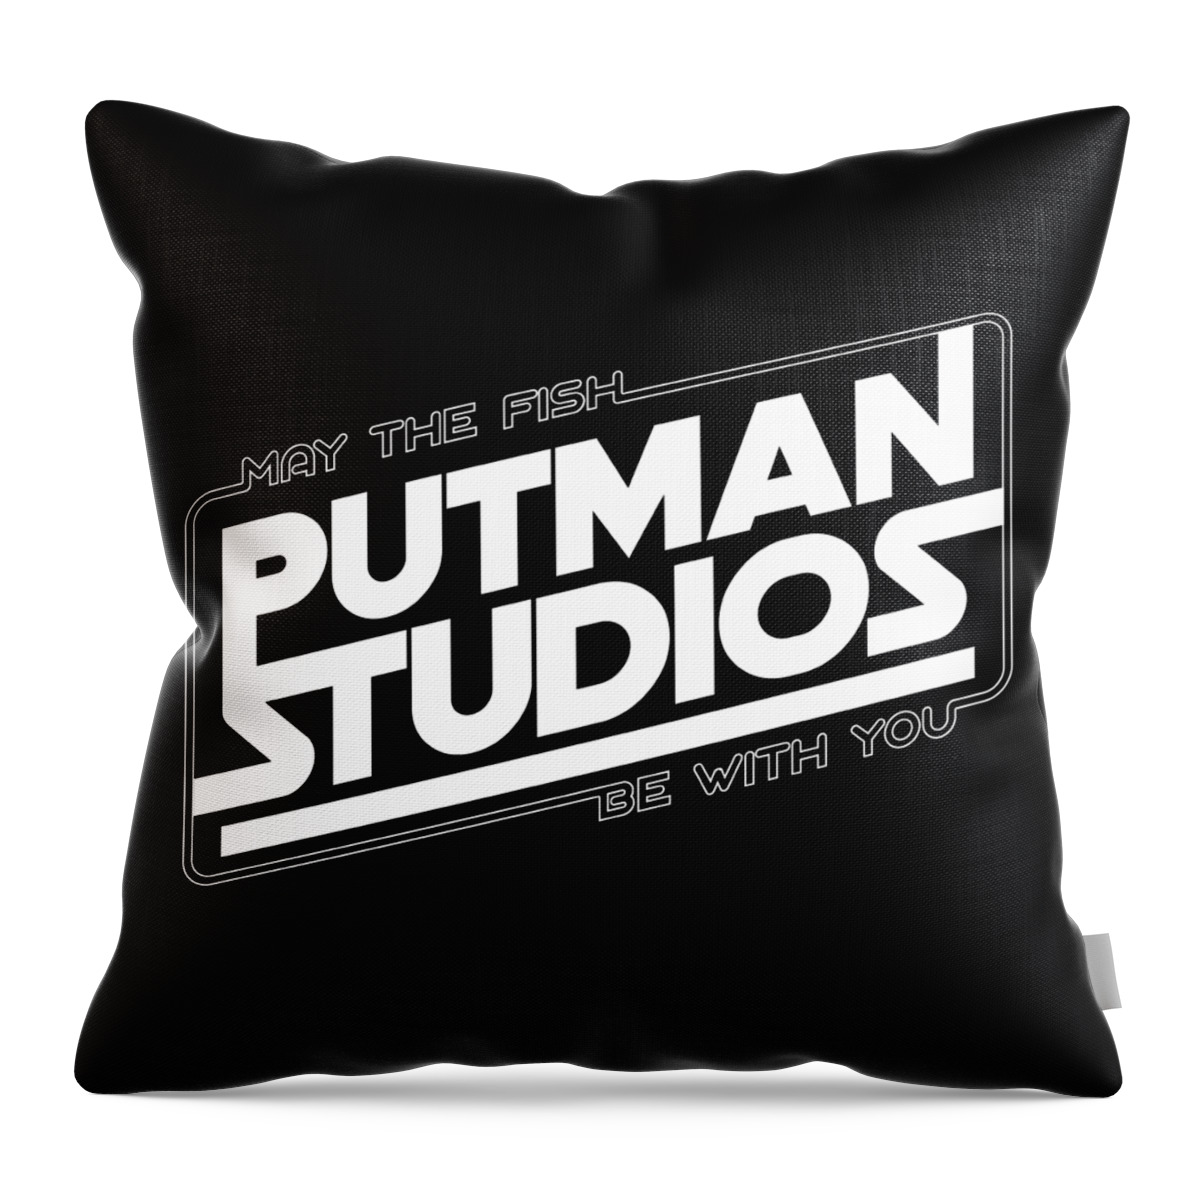  Throw Pillow featuring the digital art May The Fish Be With You by Kevin Putman